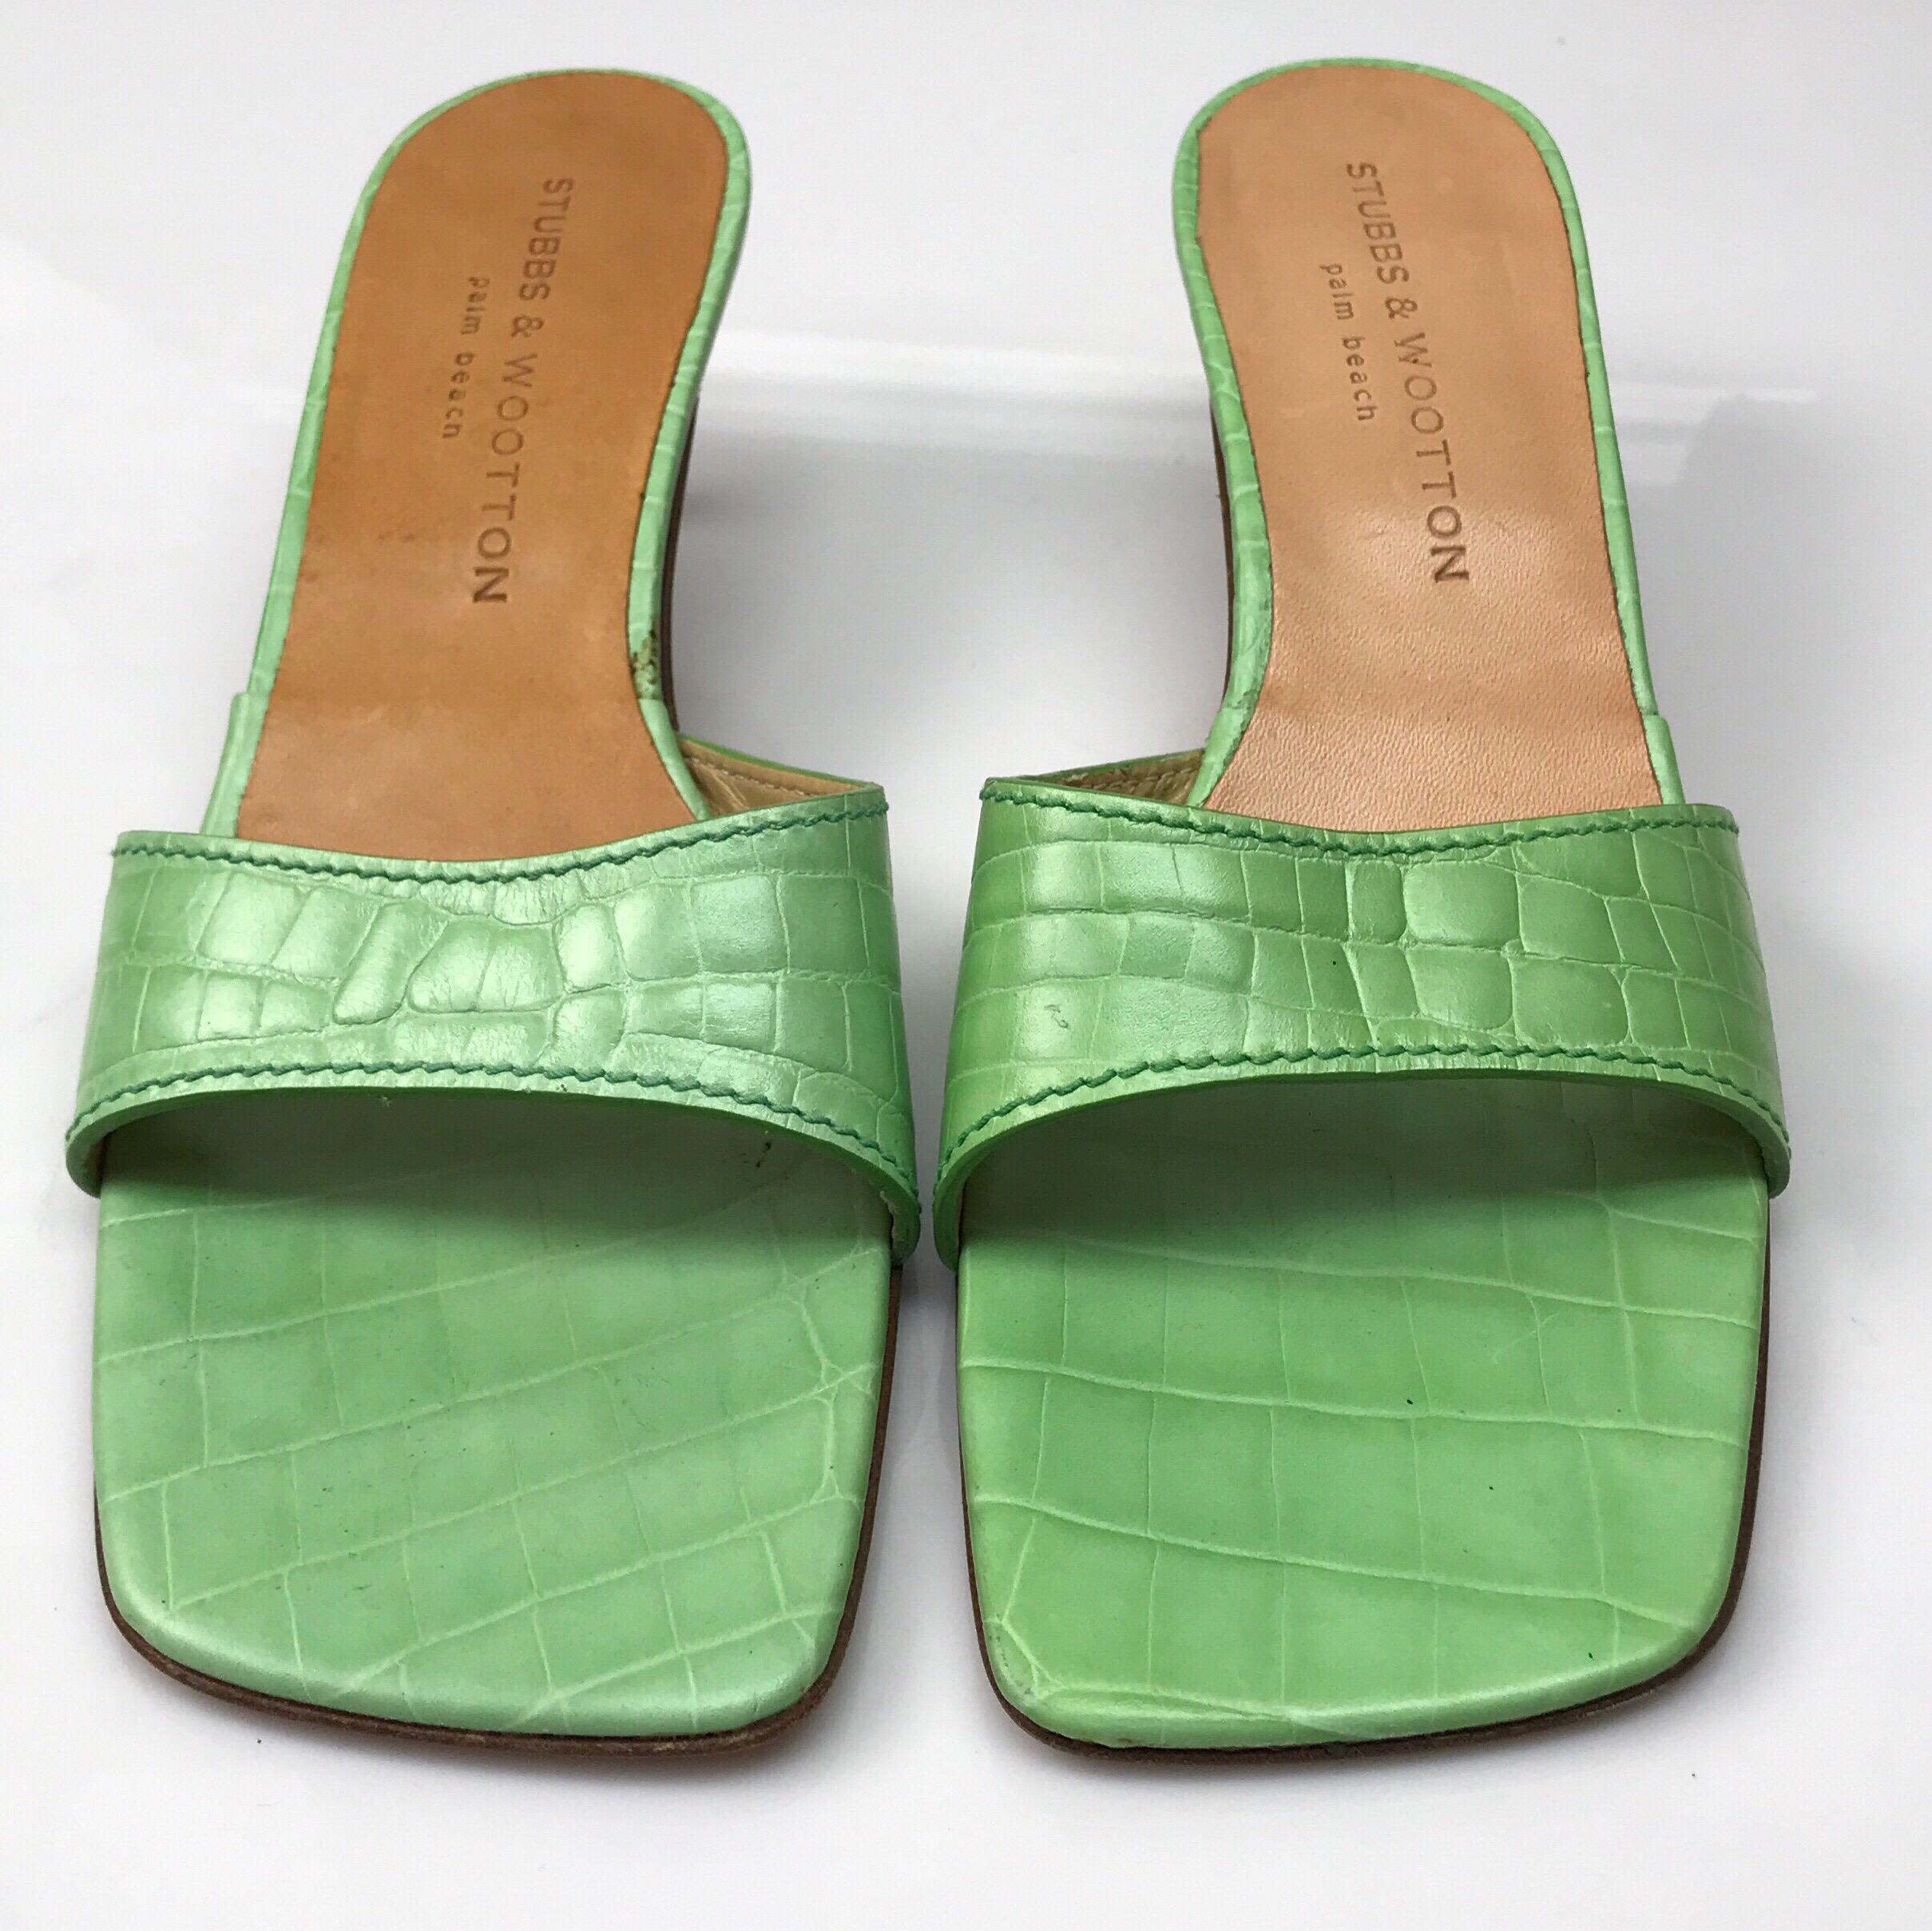 Stubbs & Wooton GREEN Faux Alligators Shoes-9.5. The adorable Stubbs & Wootton short heels are in good condition. They show some wear with small stains and the rubber heel protector missing, shown in picture. They are a green color with a faux